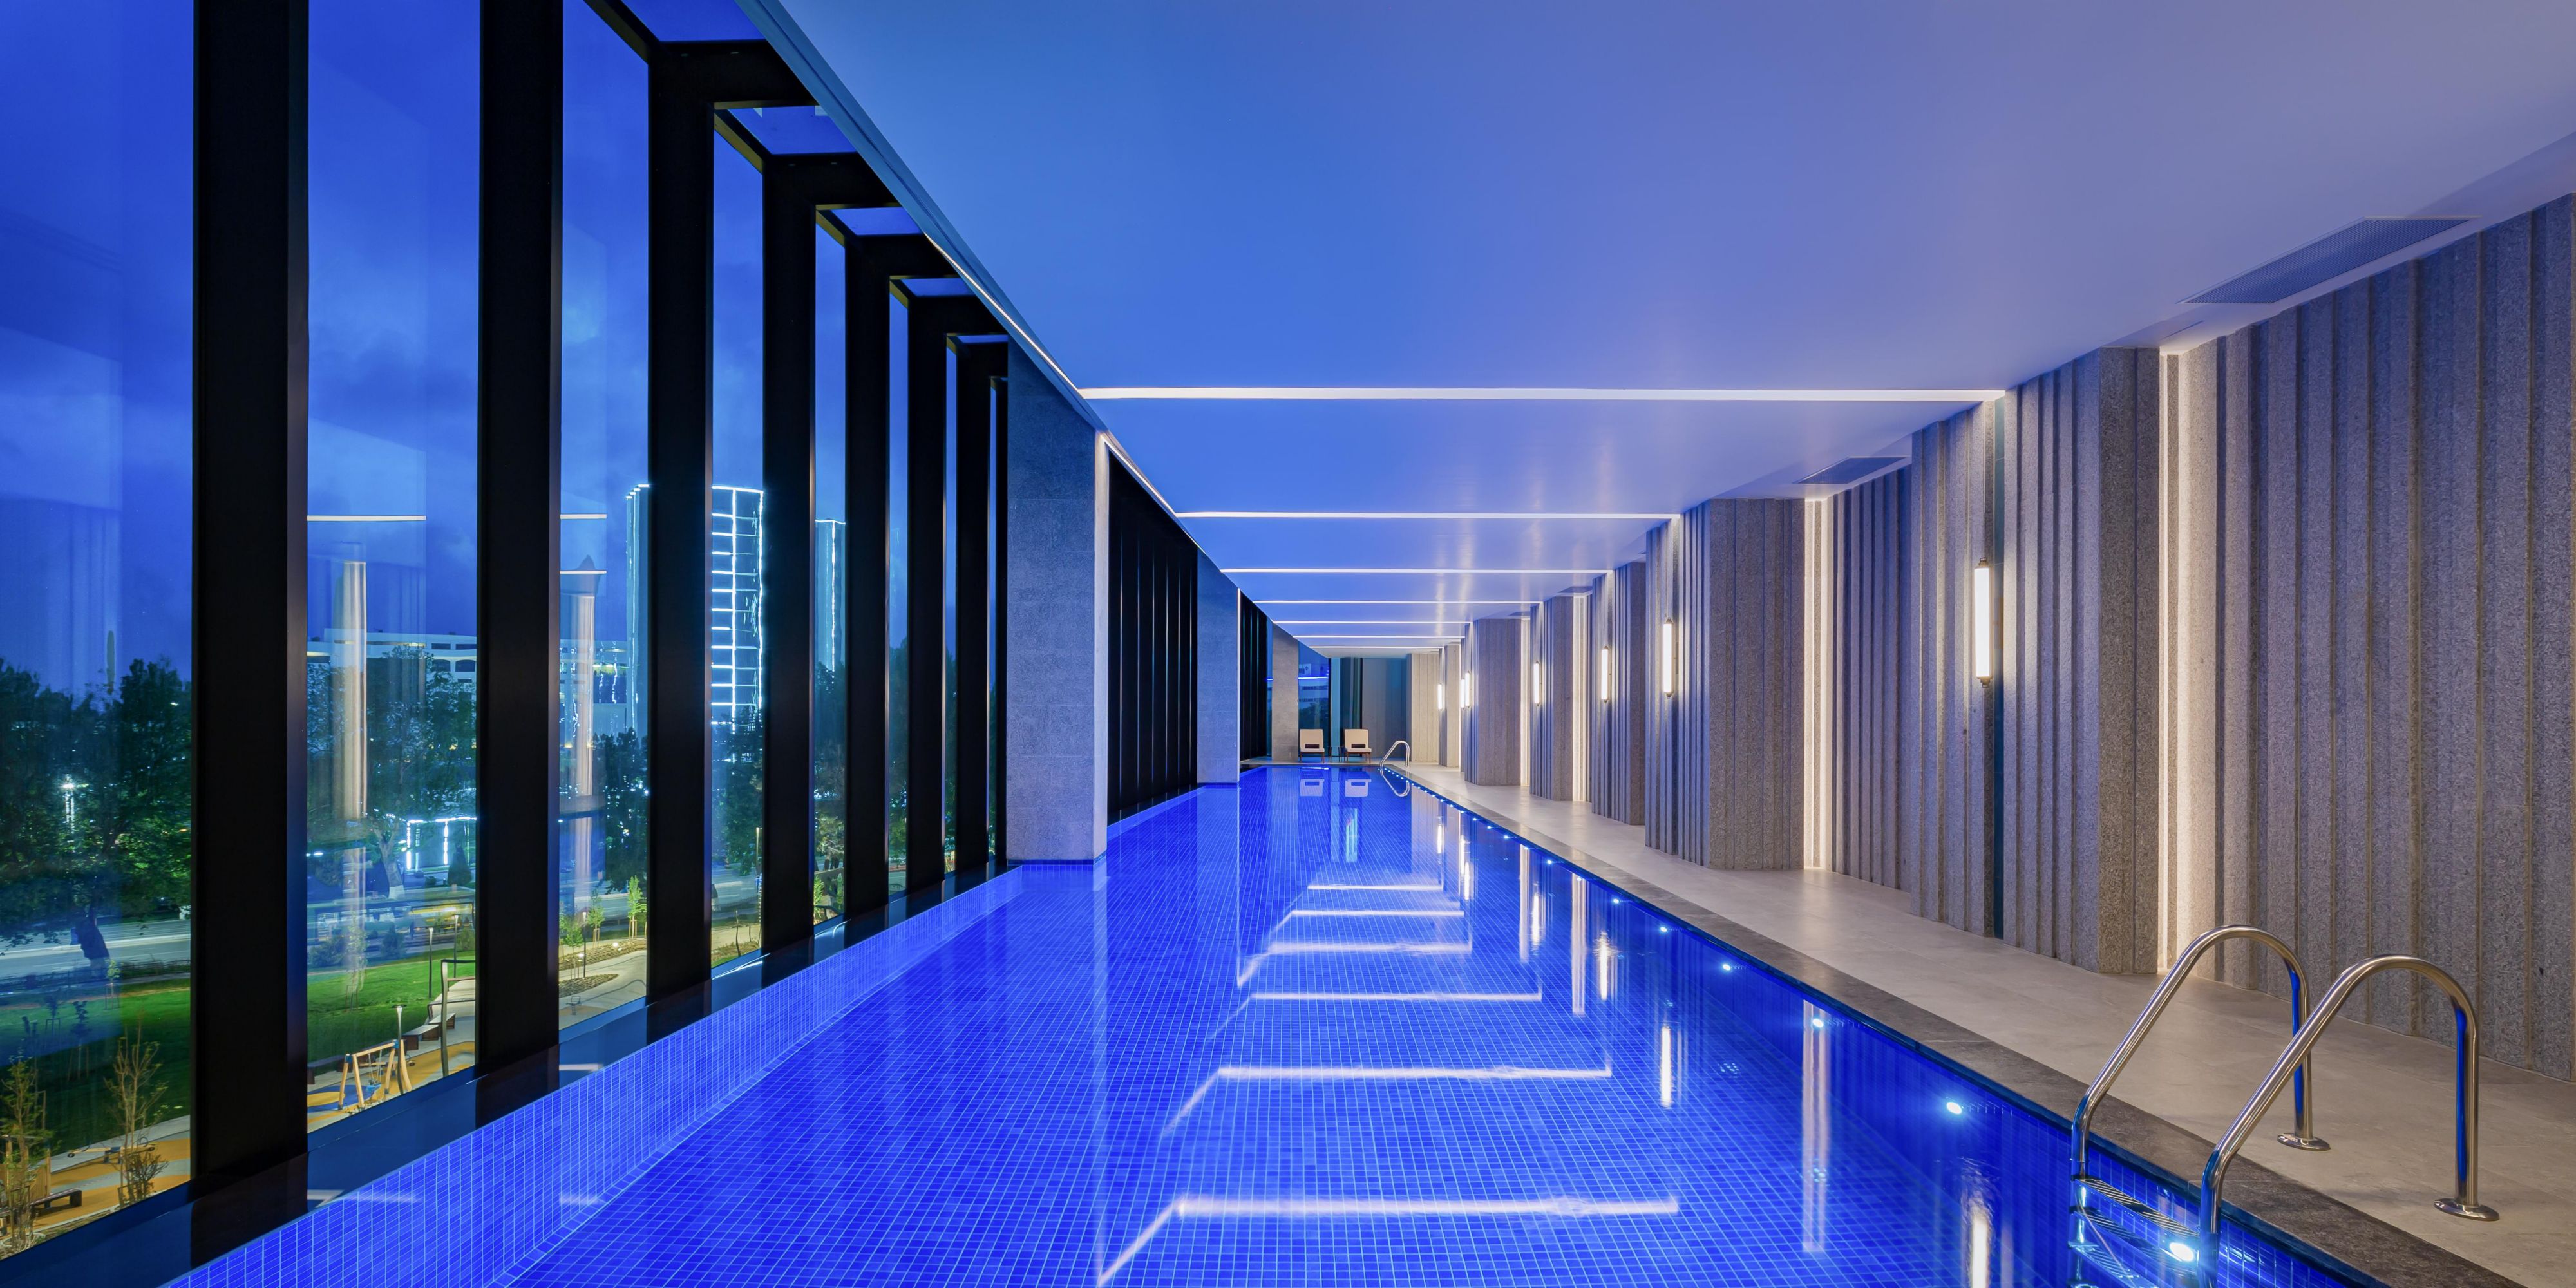 E’quilibrium Wellness Club boasts an impressive 2’500 sqm of space and includes a 30-metre pool, whirlpool, sauna, steam room, Turkish hammam and numerous treatment rooms. The fitness centre is spread over 300 sqm and offers various studios and a large outdoor space.